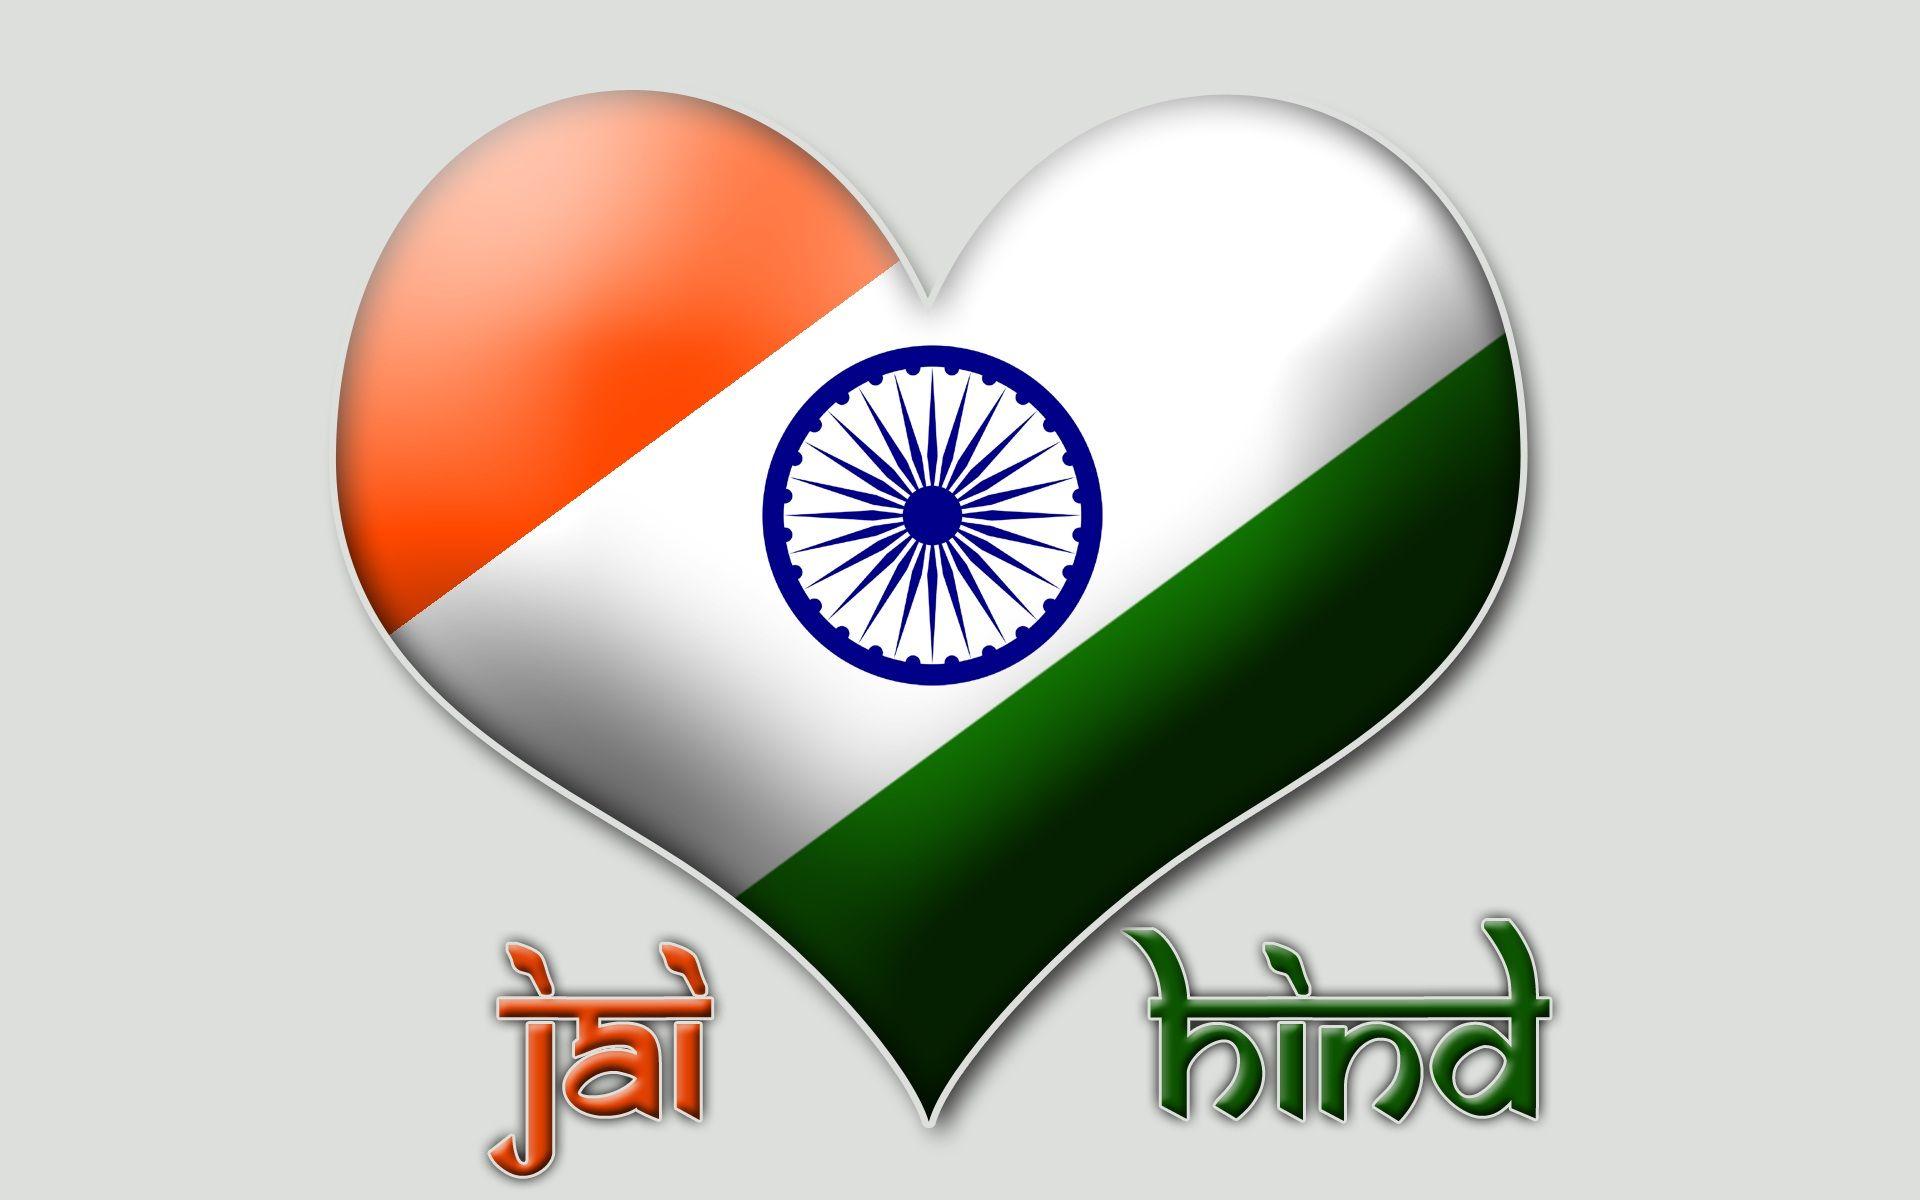 Jai hind hires stock photography and images  Alamy